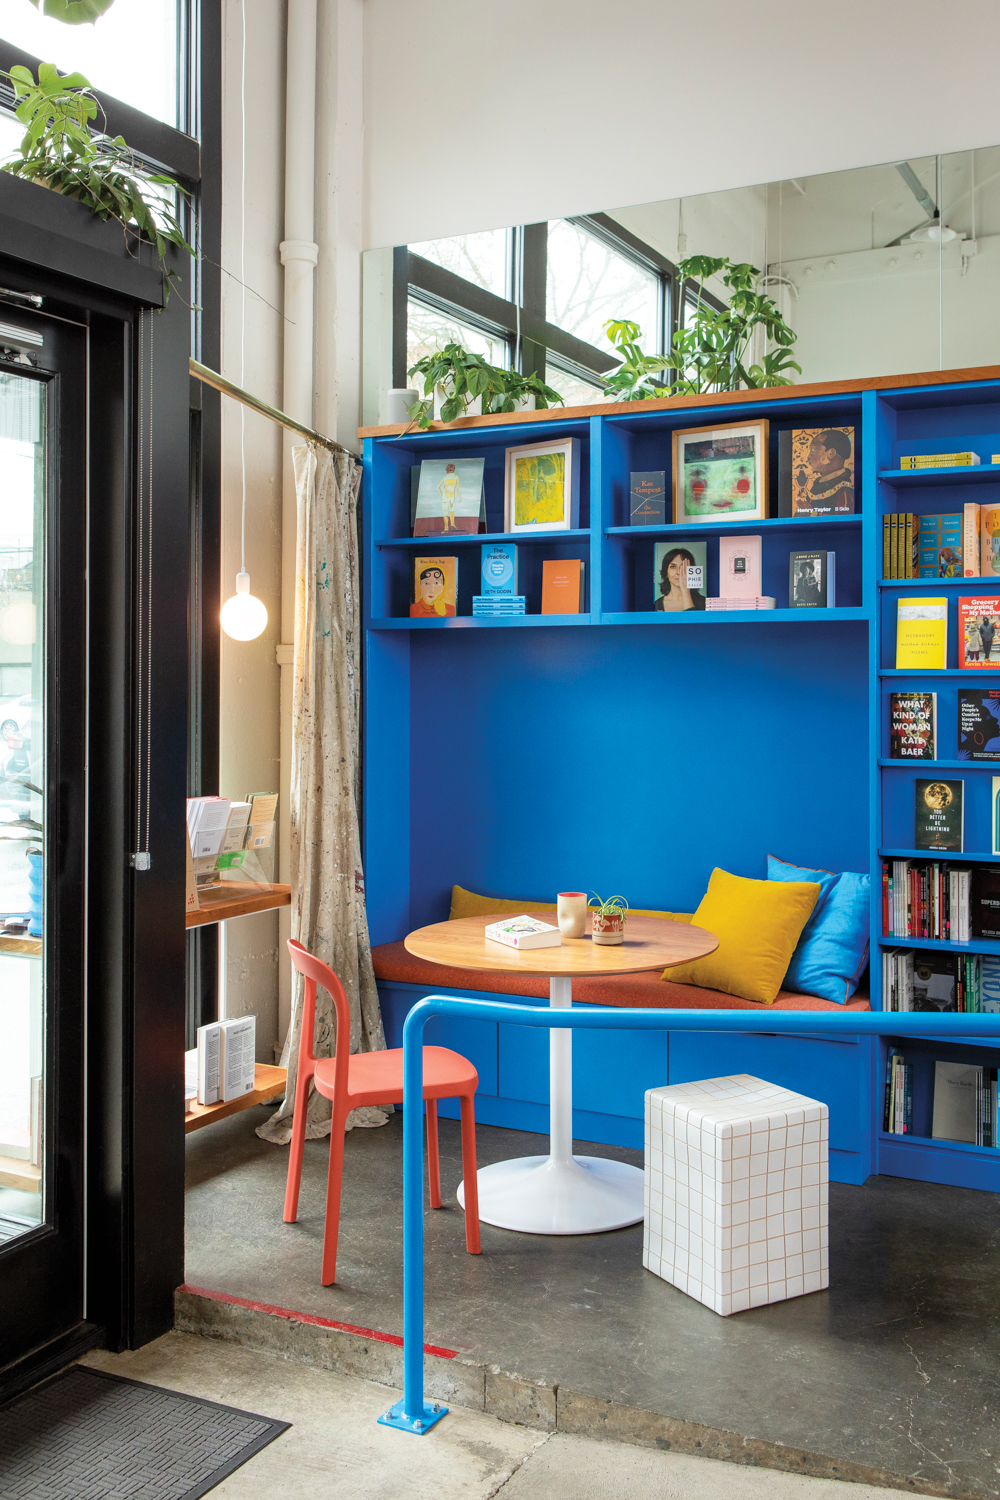 Up Up Books store with bright blue shelves and built-in reading nook